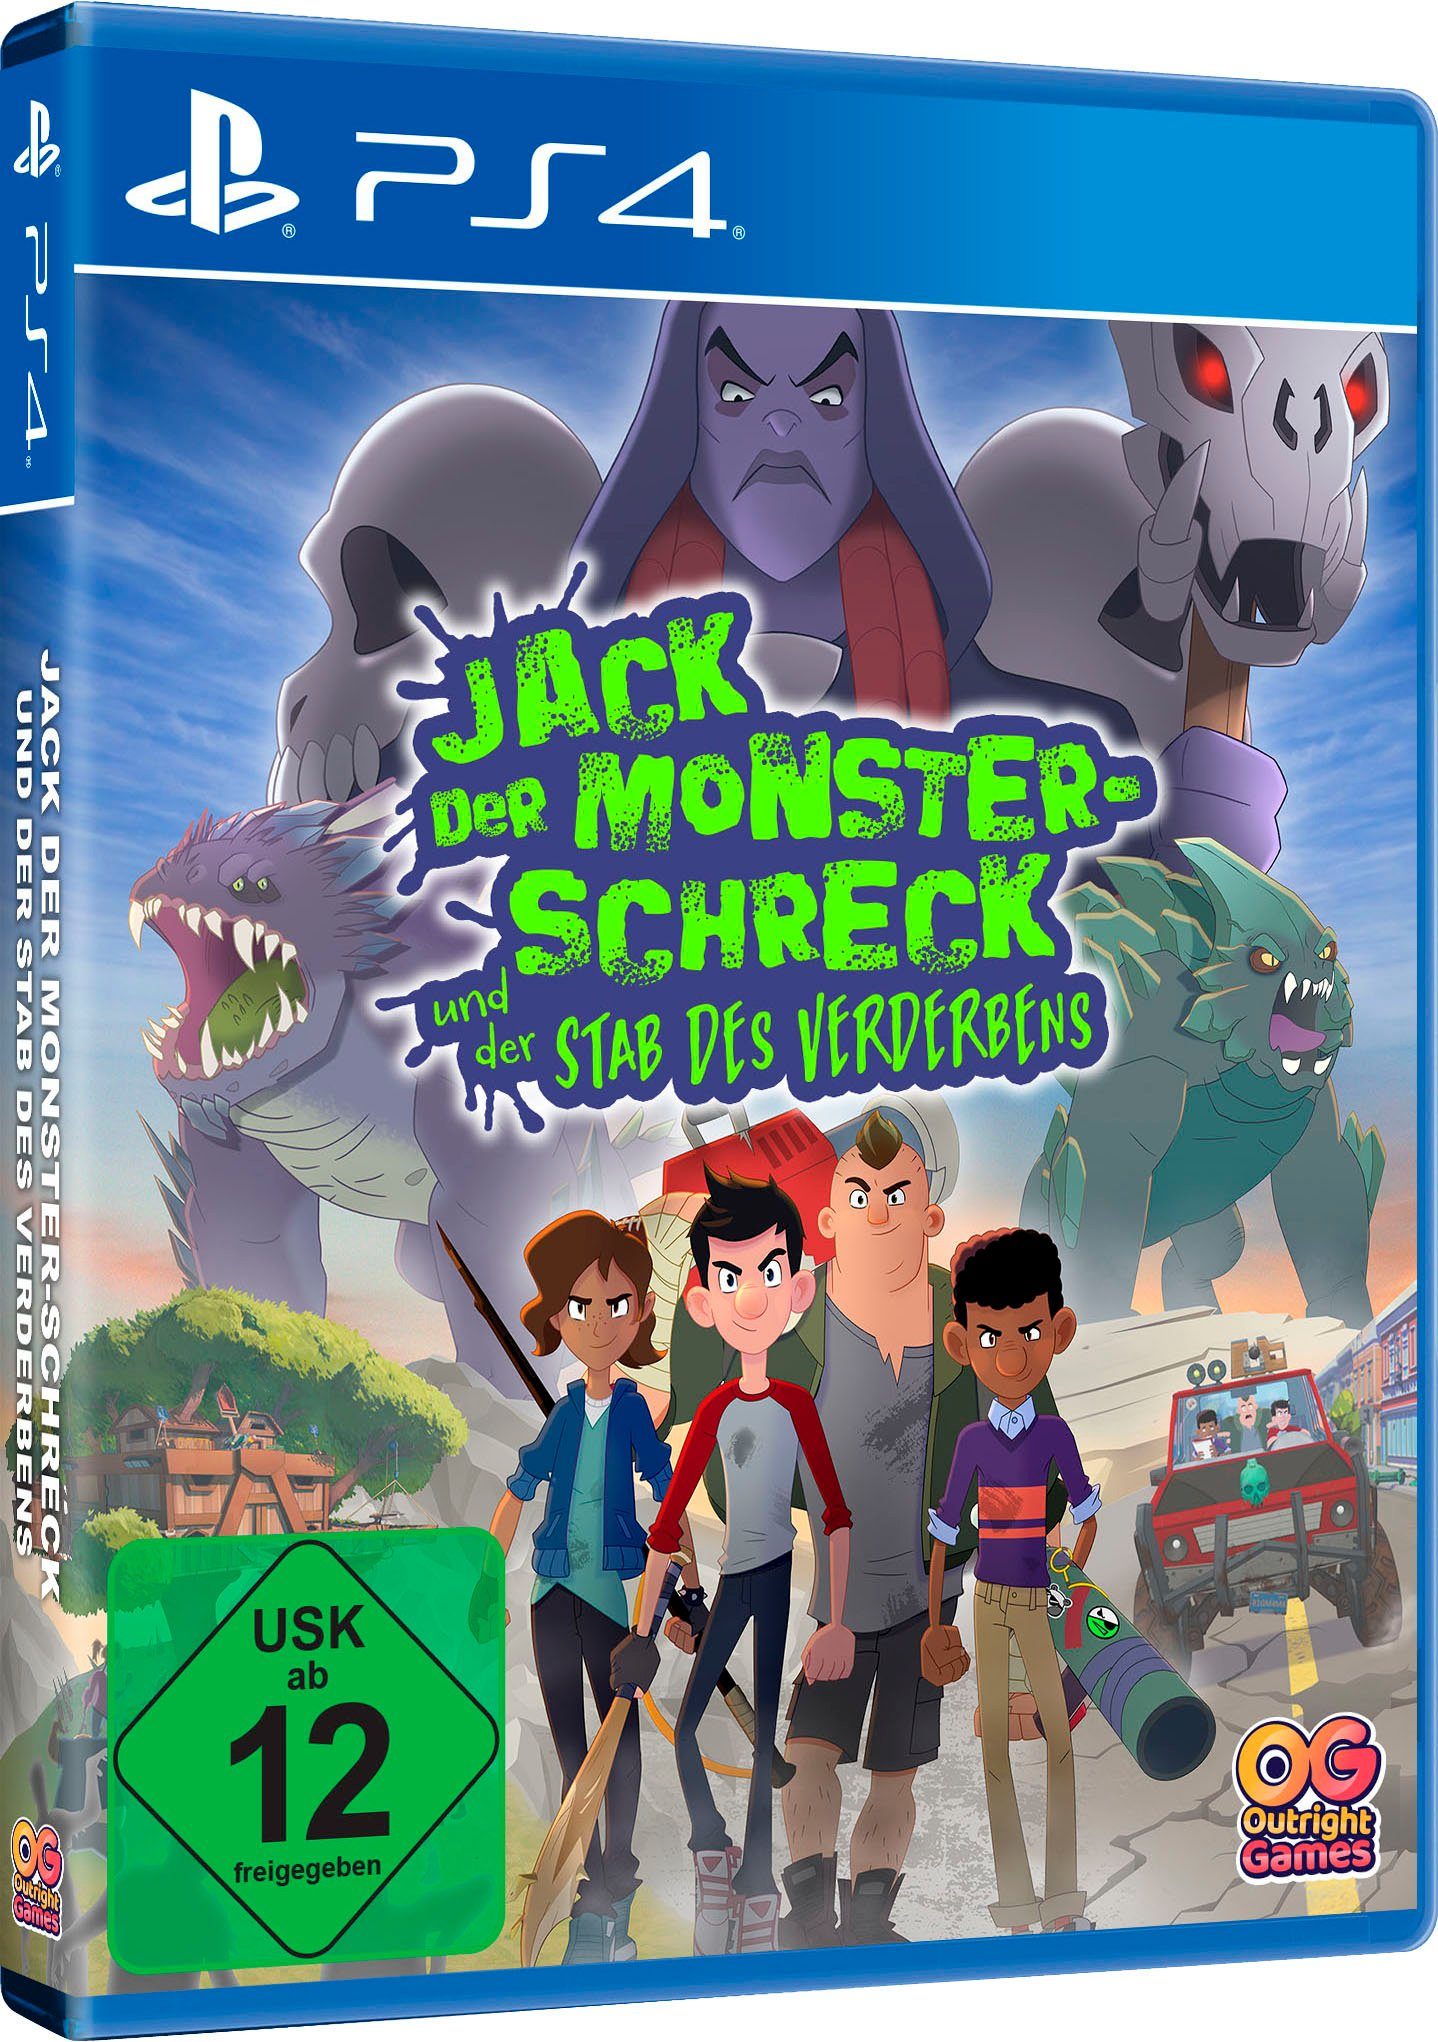 Outright Games Jack, Kids 4 Last der Earth) on Monsterschreck (The PlayStation